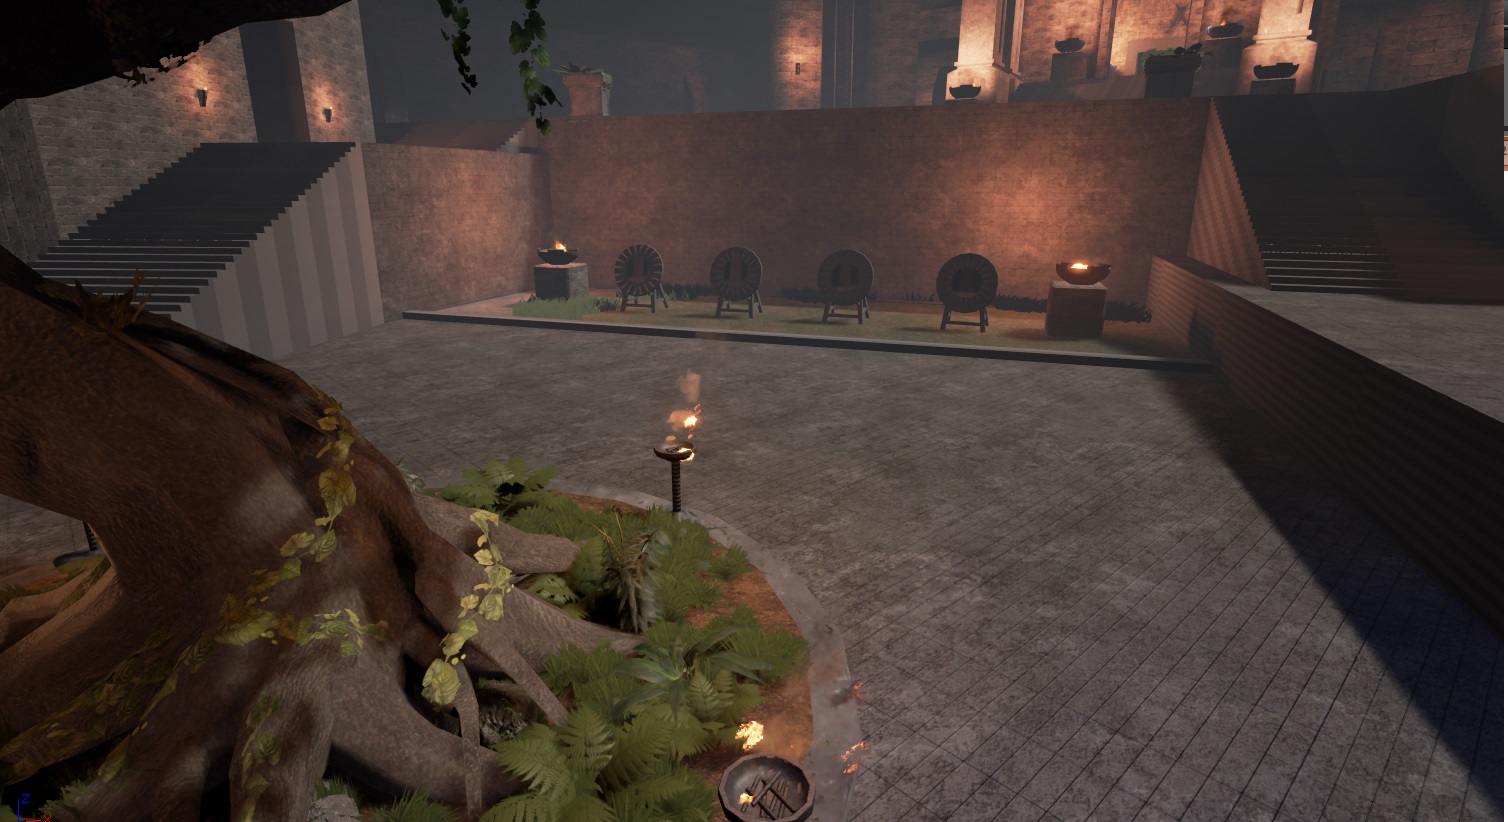 courtyard_wip_by_captainapoc-d7zlulf.jpg